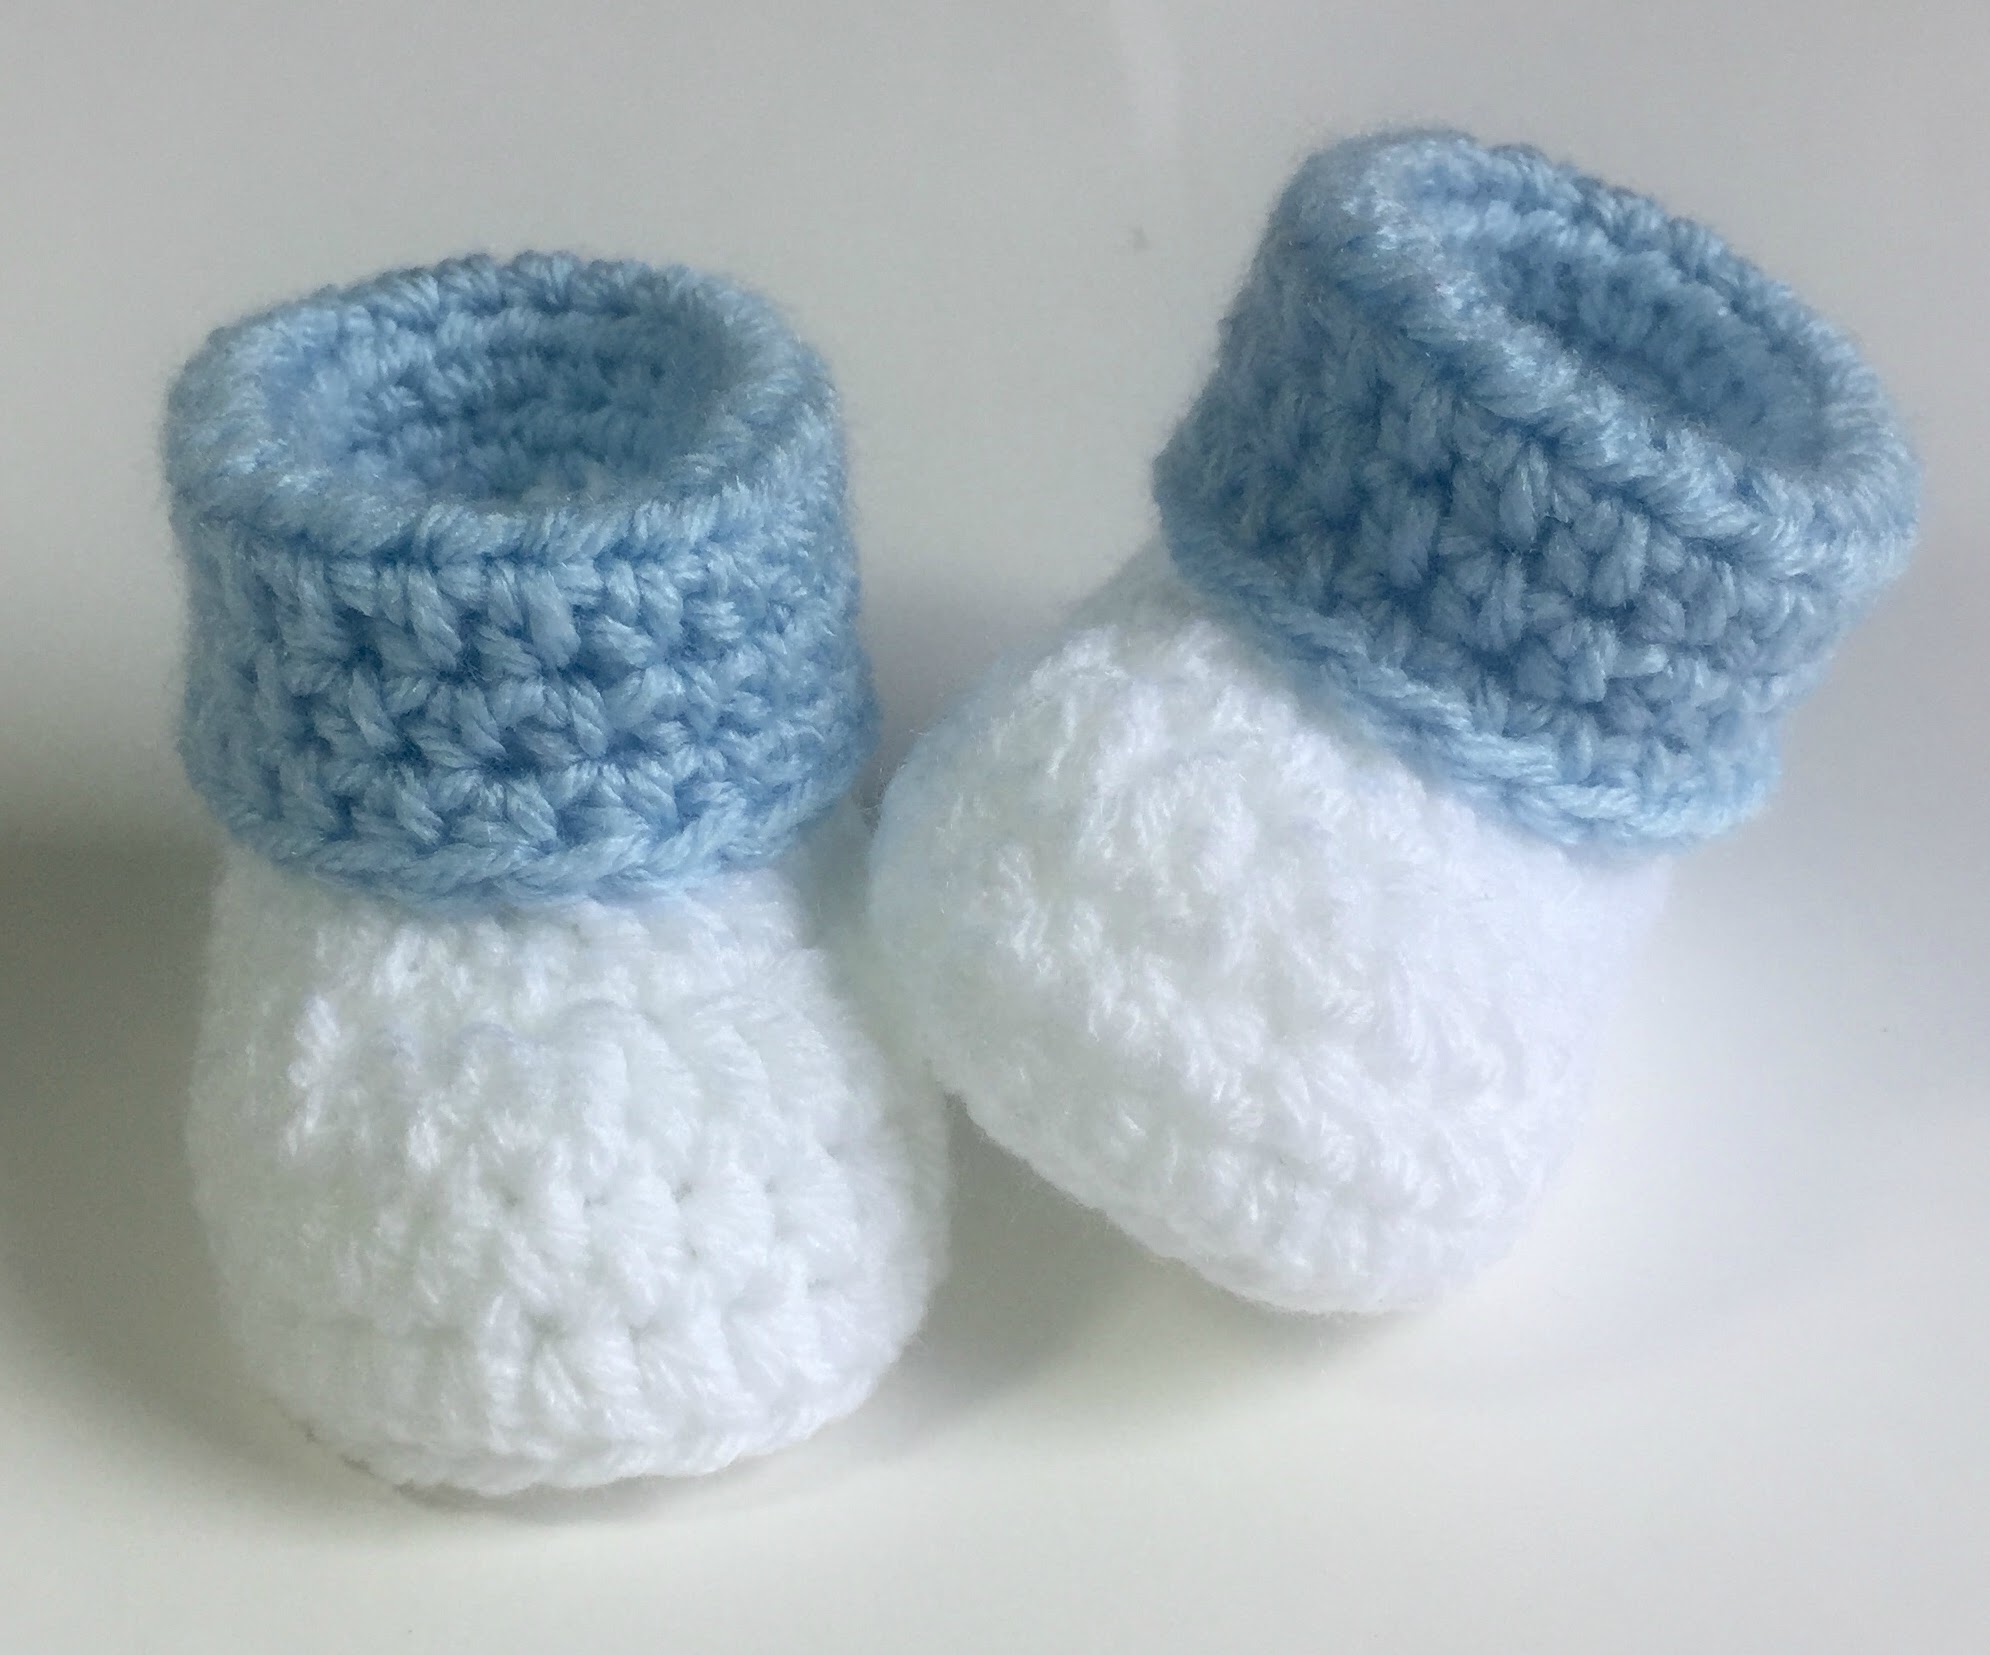 Crochet Baby Booties Baby Hat 0 to 3 Months